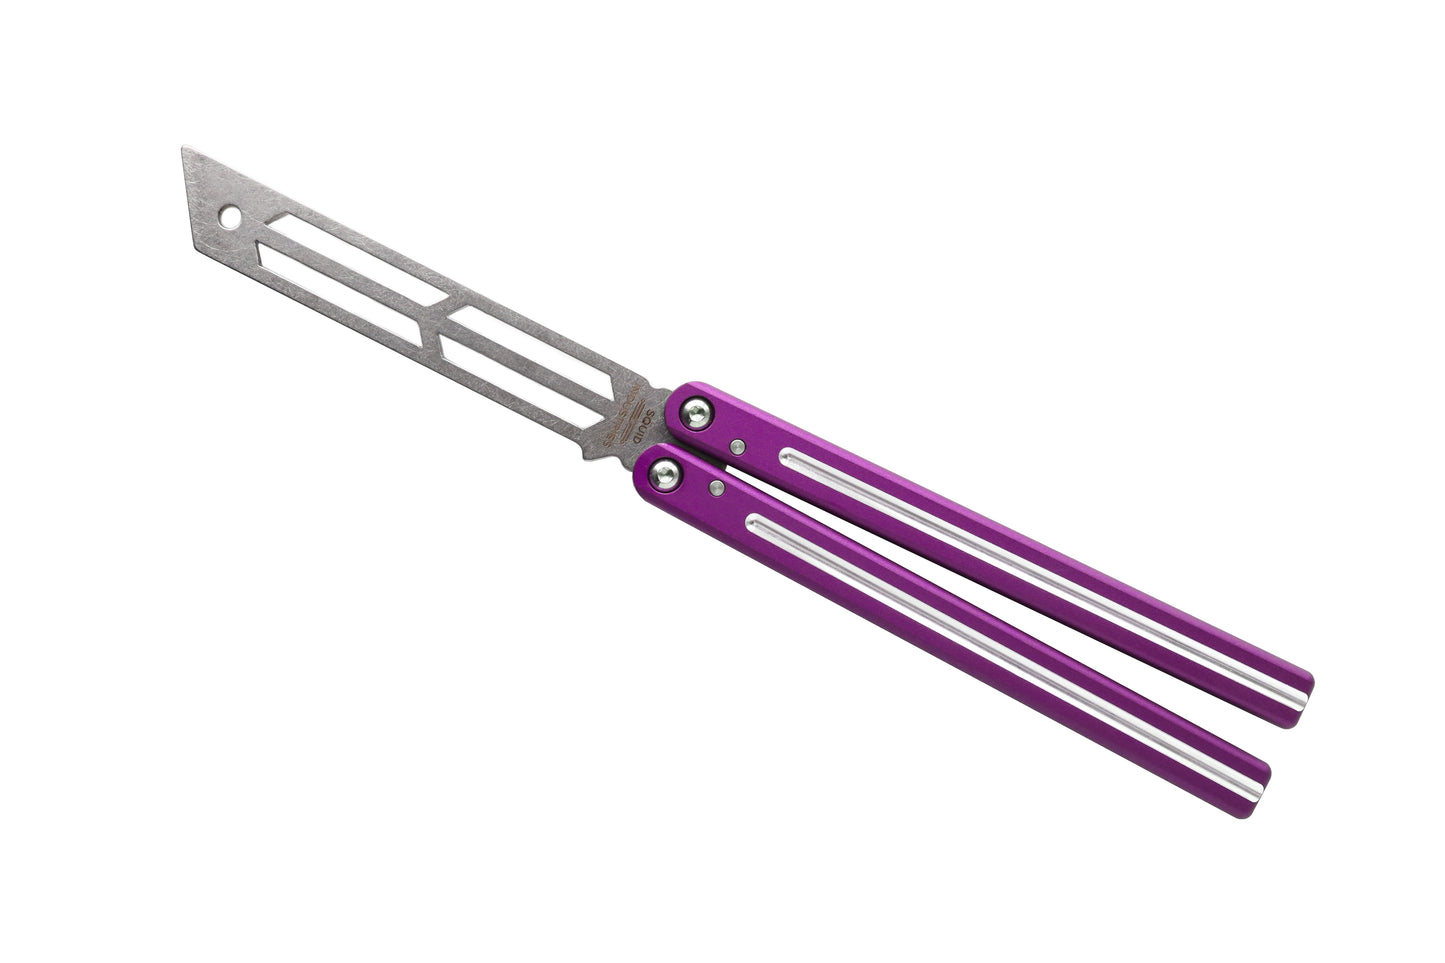 dual-tone purple Triton V2 Clearance Blemished Balisong Butterfly Knife Trainer